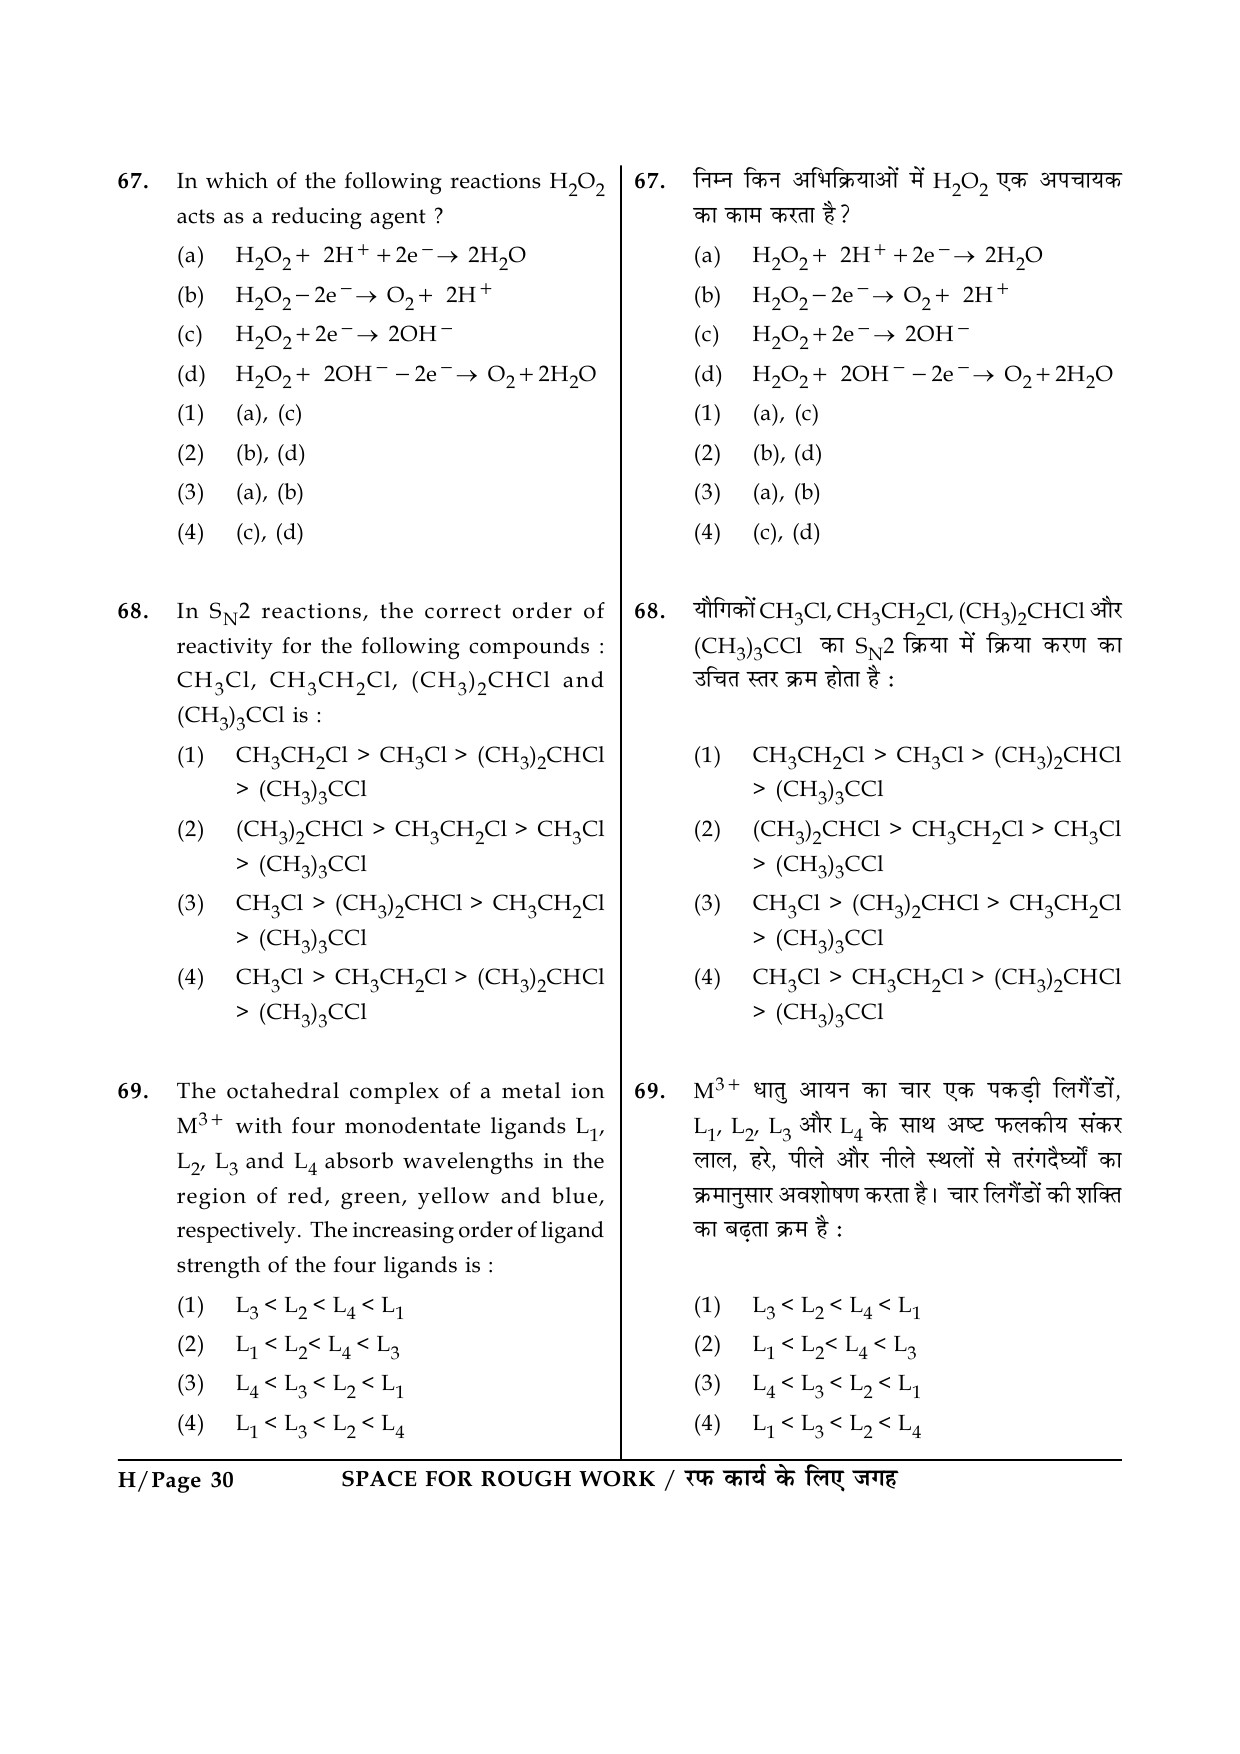 JEE Main Exam Question Paper 2014 Booklet H 30